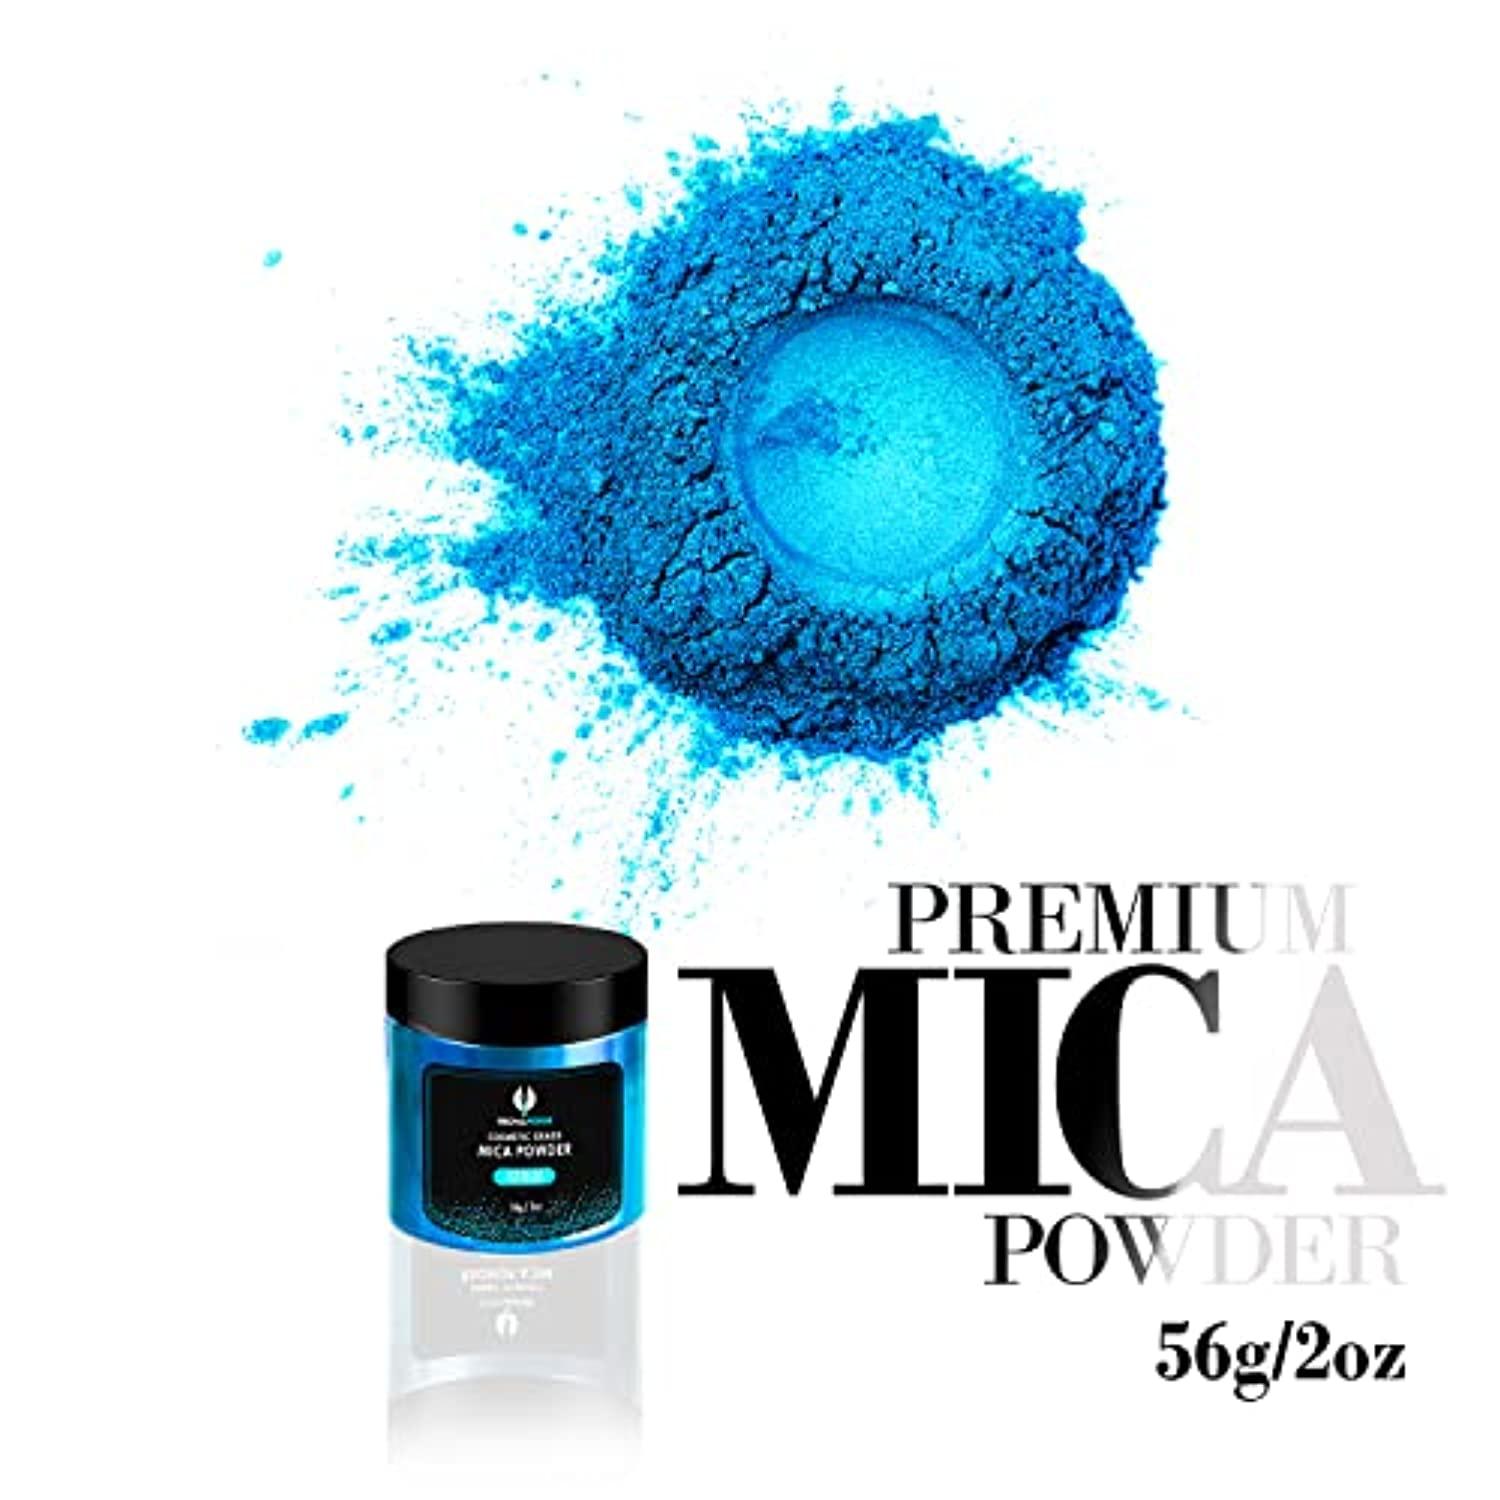 Ice Blue Mica Powder for Epoxy Resin 56g / 2oz. Jar Techarooz 2 Tone Resin  Dye Color Pigment Powder for Lip Gloss, Nails, Colorant for Slime Bath